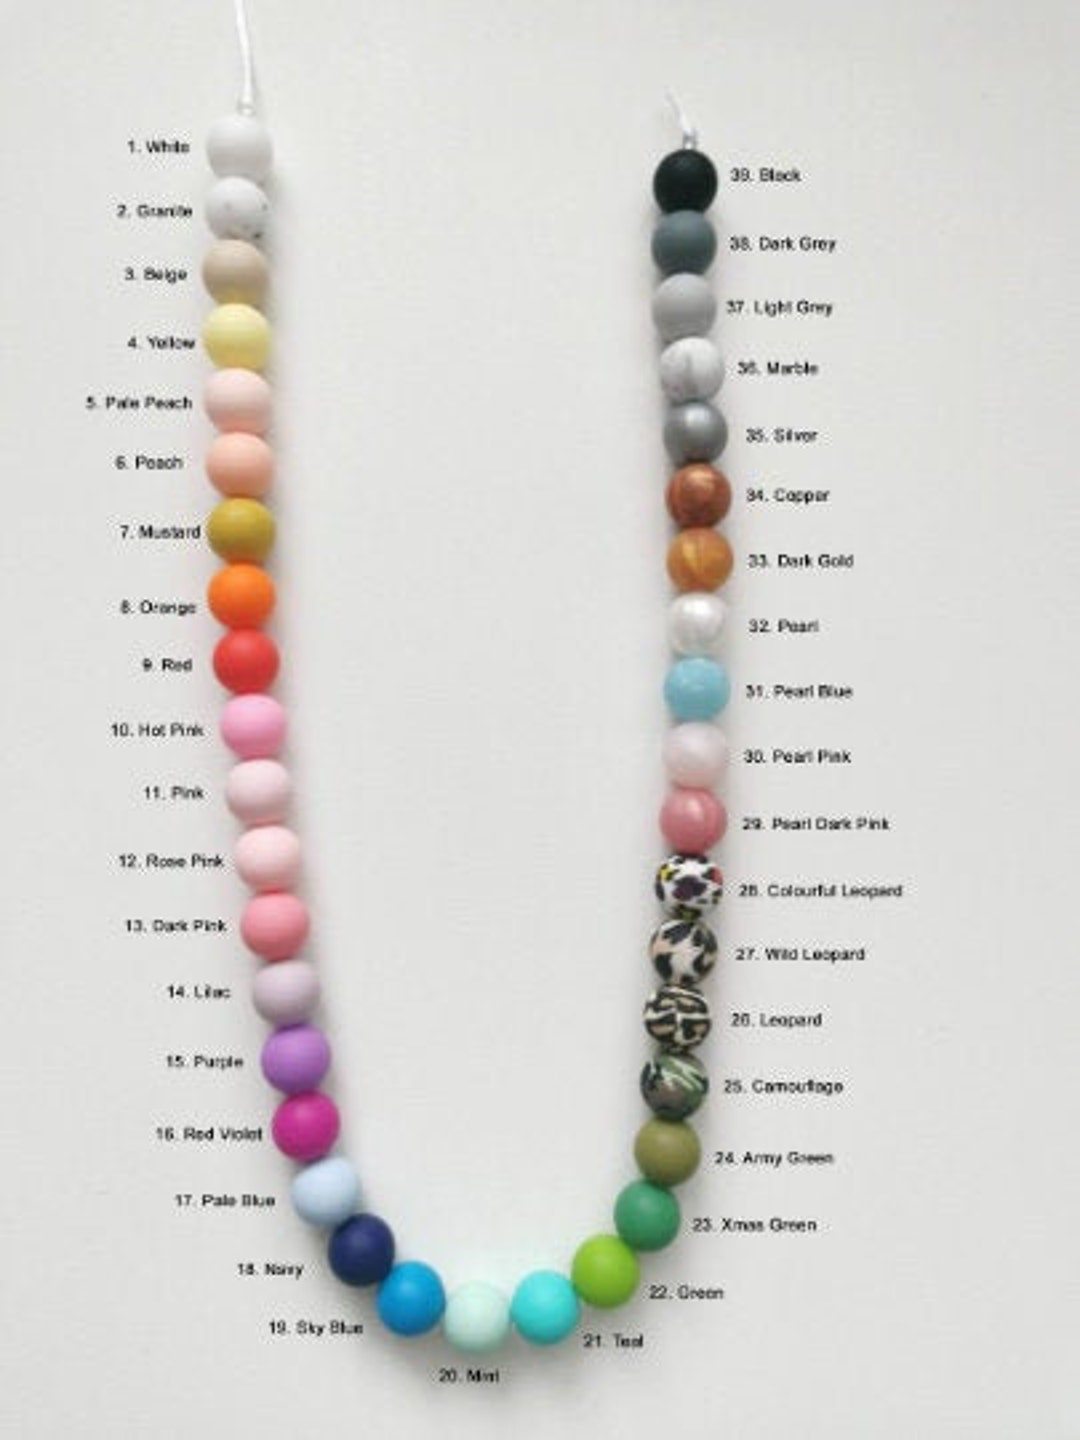 Alphabet 12mm Baby Teeth Beads Necklace Jewelry DIY Accessories Silicone  Beads - China Beads and Silicone Beads price